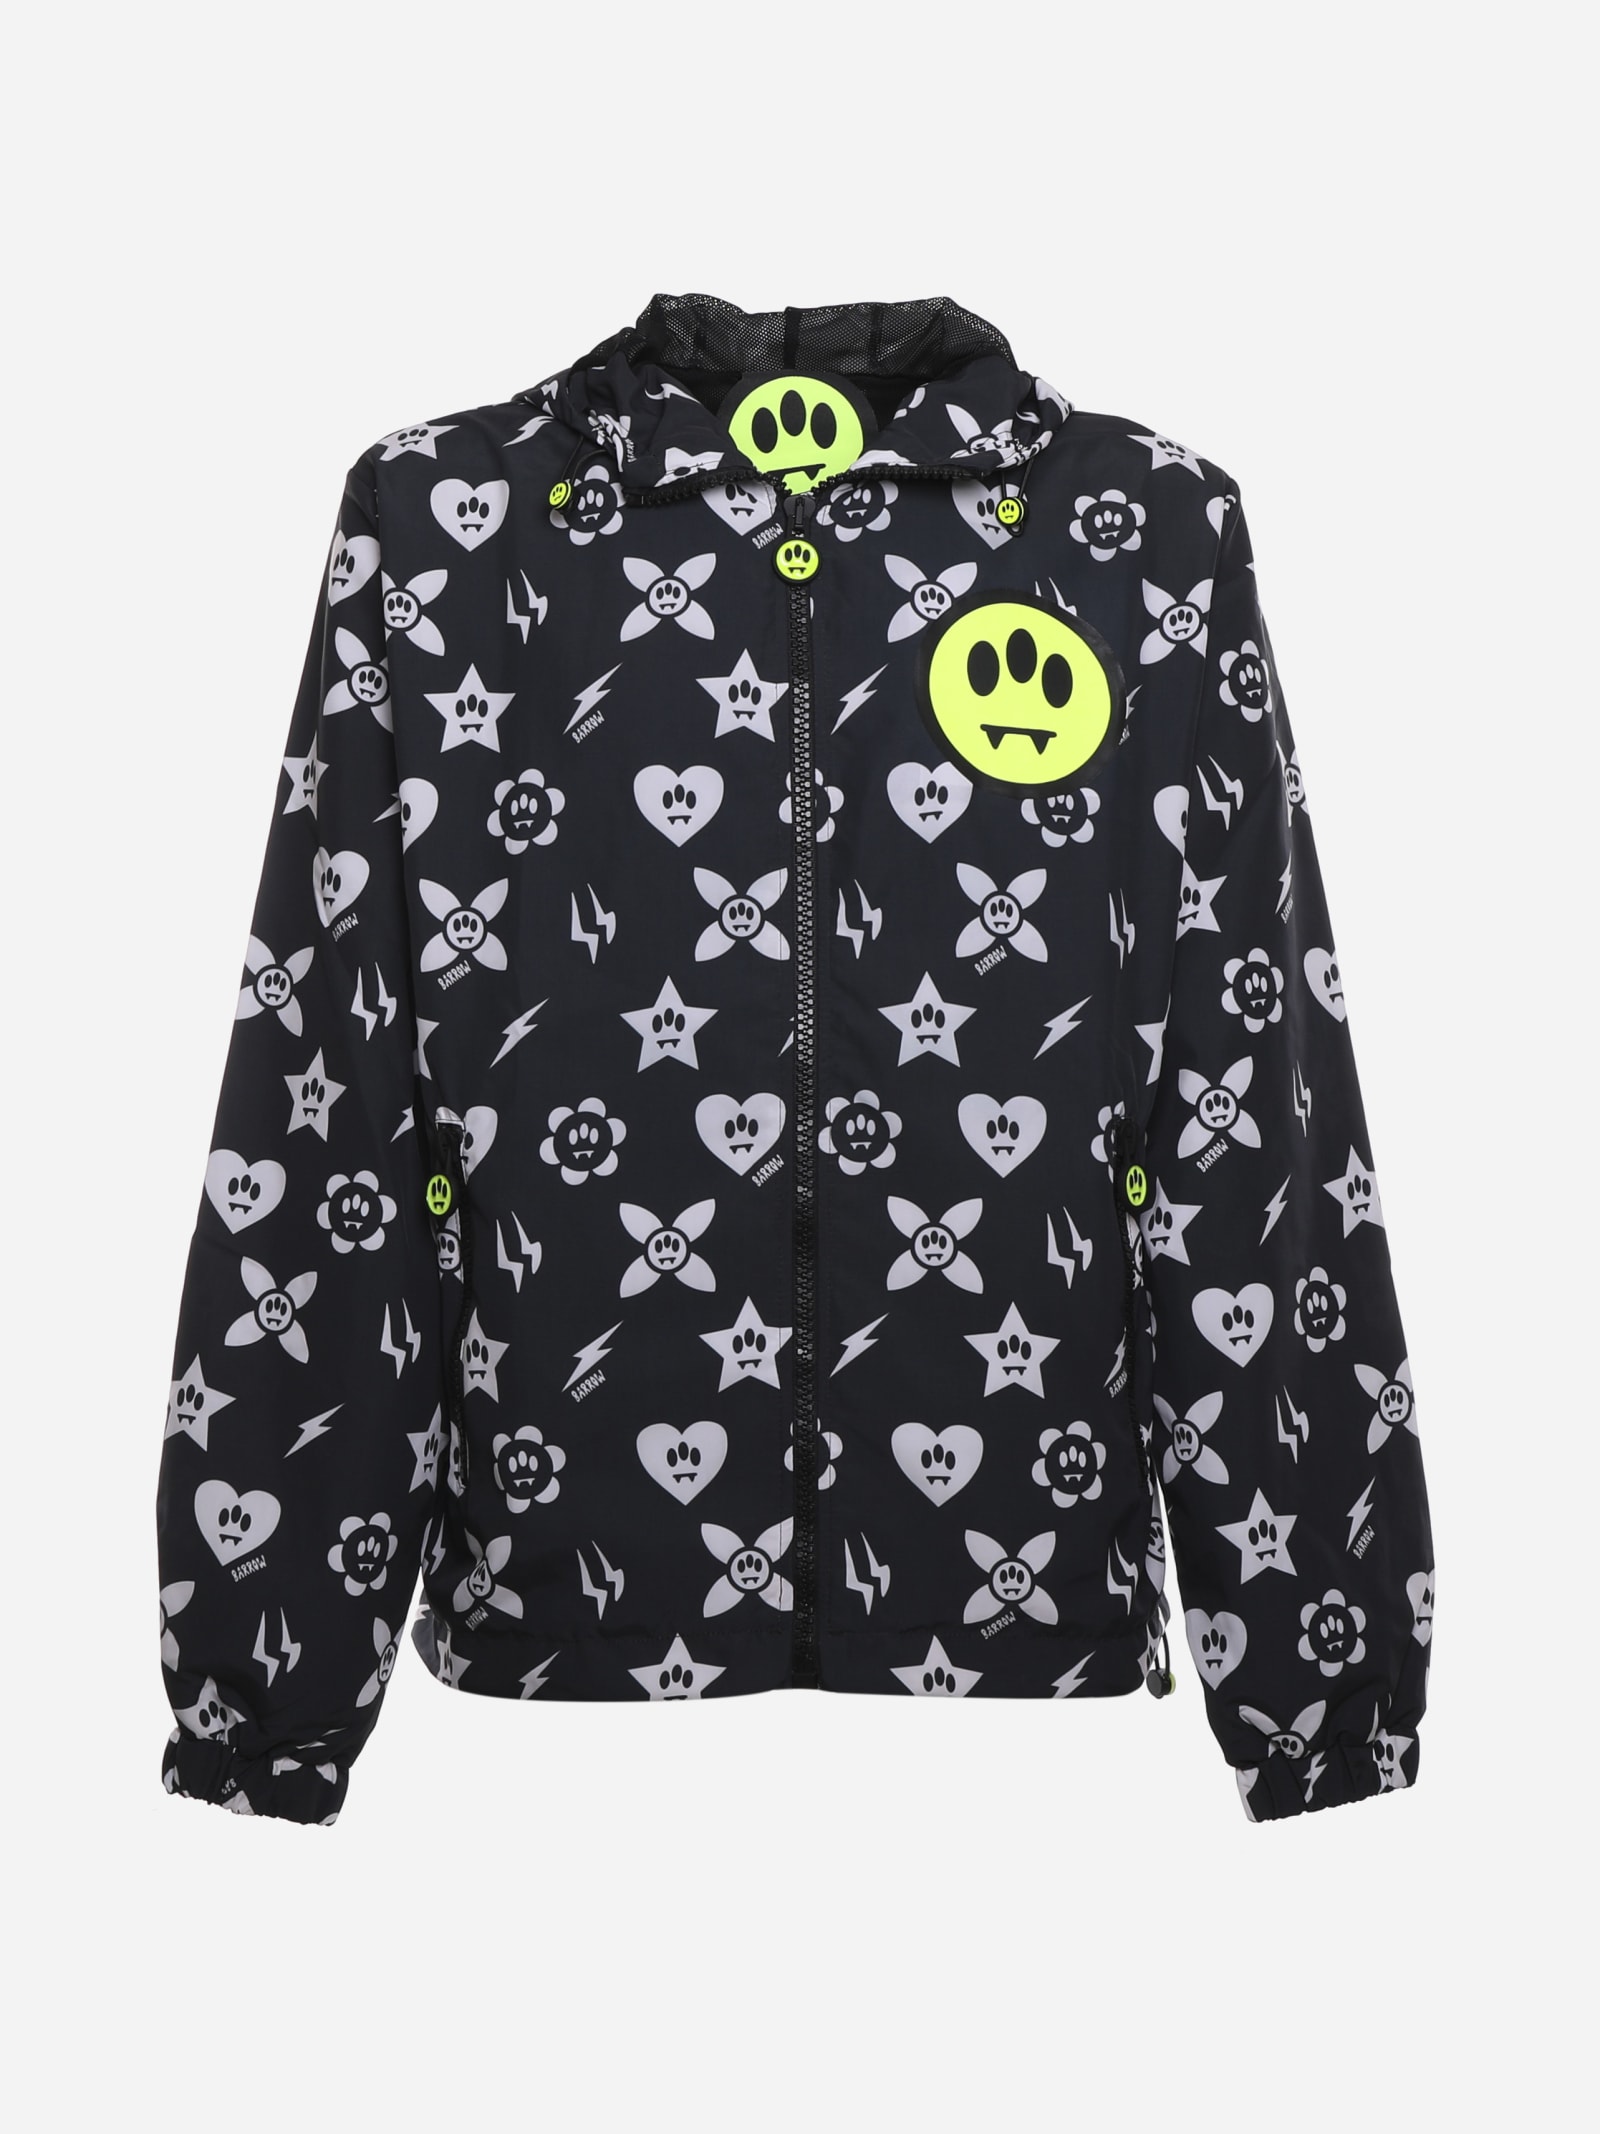 BARROW NYLON JACKET WITH ALL-OVER GRAPHIC PRINT,029155 -110